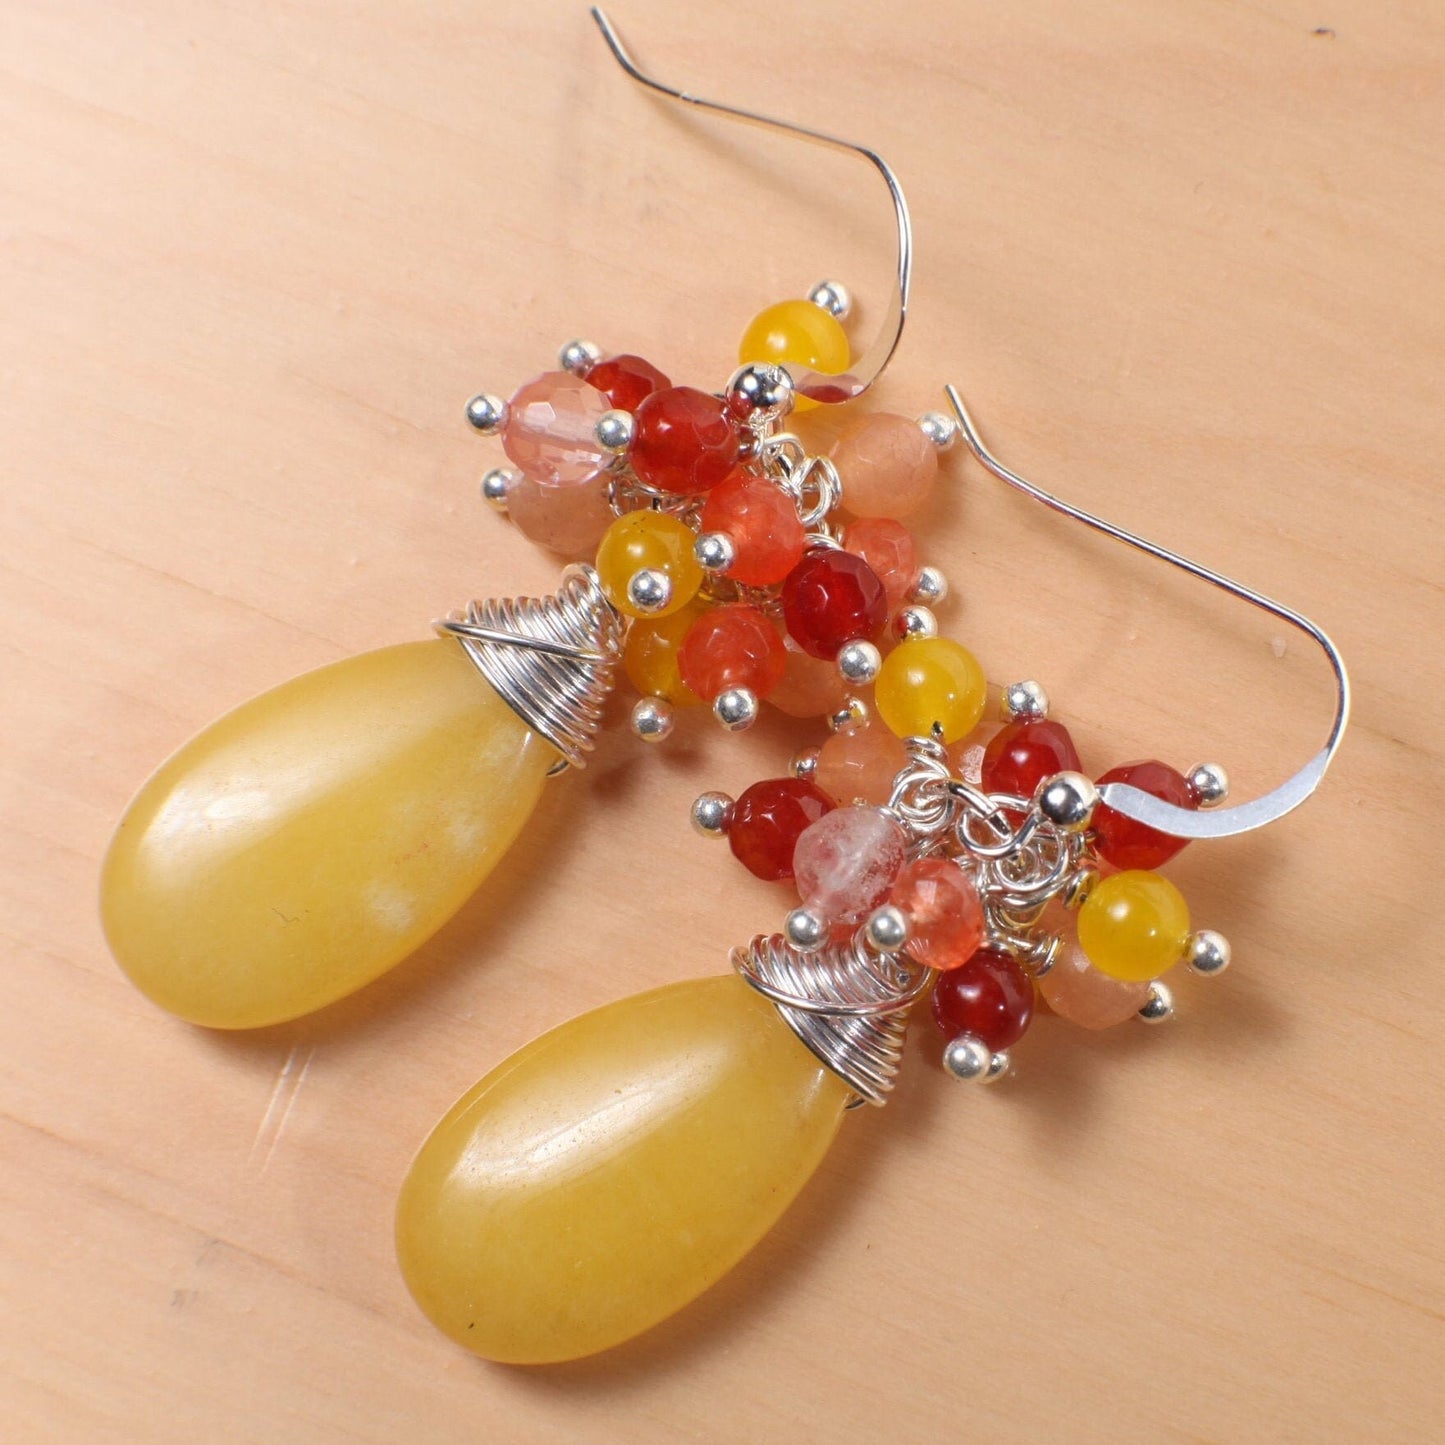 Carnelian, Yellow Jade, Strawberry Quartz Clusters, Ambronite Long Tear Drop Wire Wrapped 925 Sterling Silver Earwire,Available in Leverback